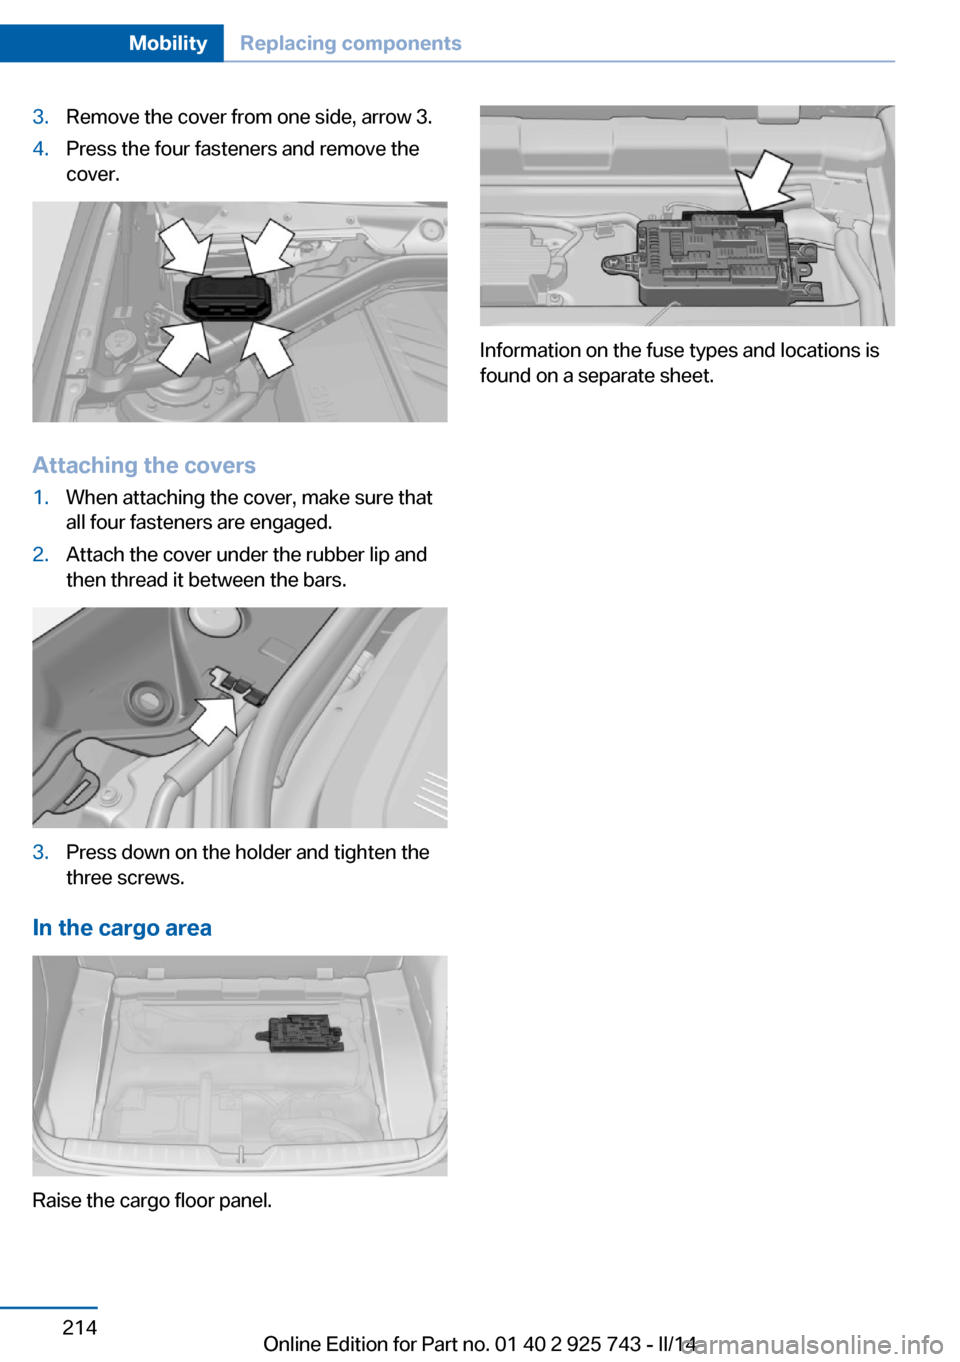 BMW 3 SERIES SEDAN 2014 F30 Owners Manual 3.Remove the cover from one side, arrow 3.4.Press the four fasteners and remove the
cover.
Attaching the covers
1.When attaching the cover, make sure that
all four fasteners are engaged.2.Attach the c